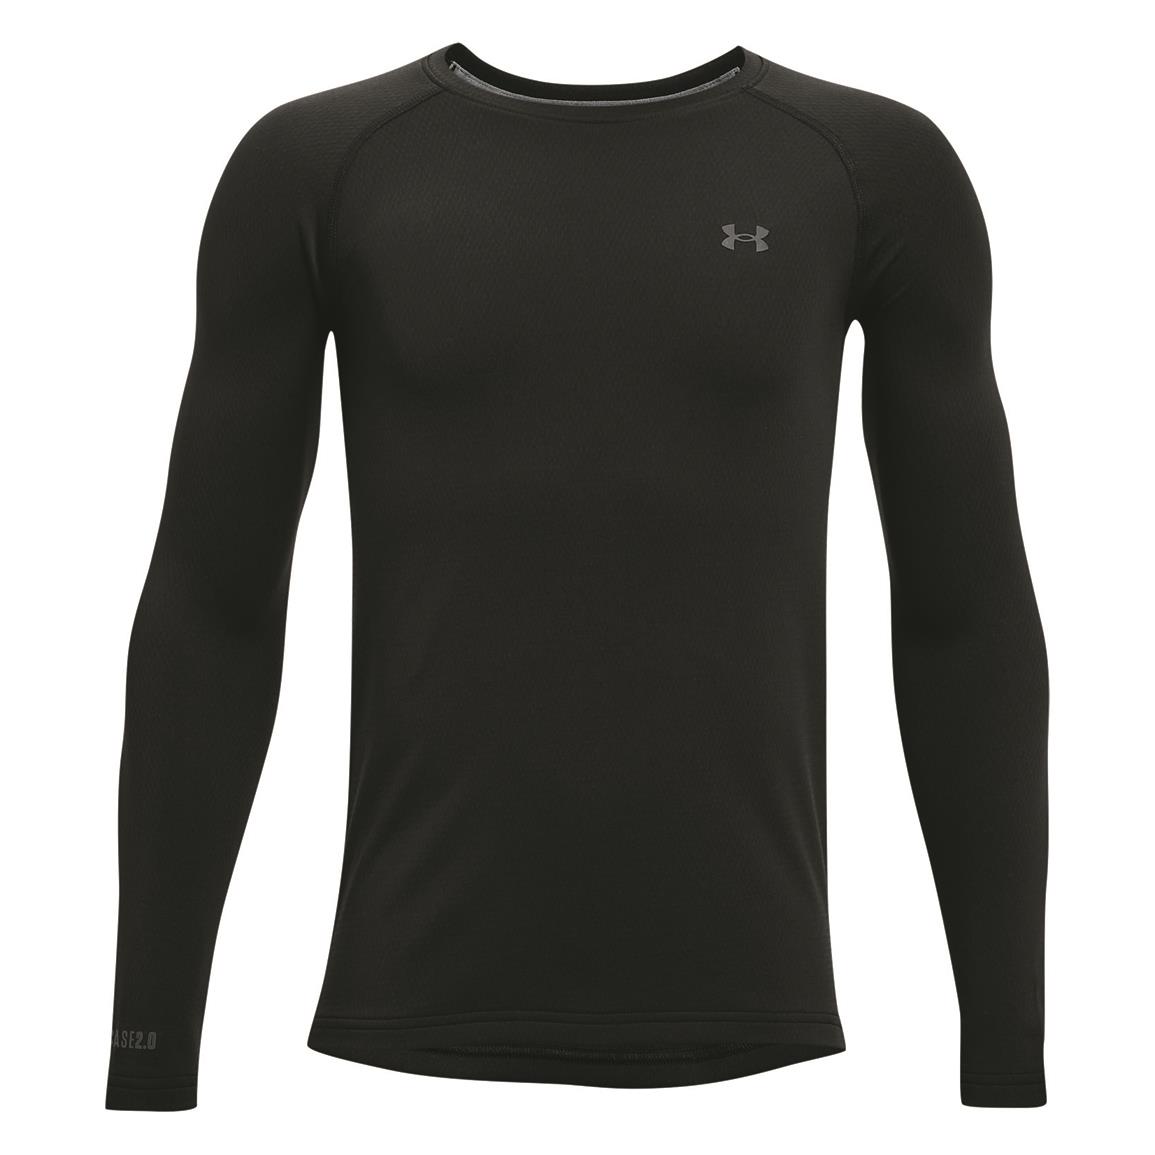 Under Armour Youth Base 2.0 Base Layer Crew Top, Black